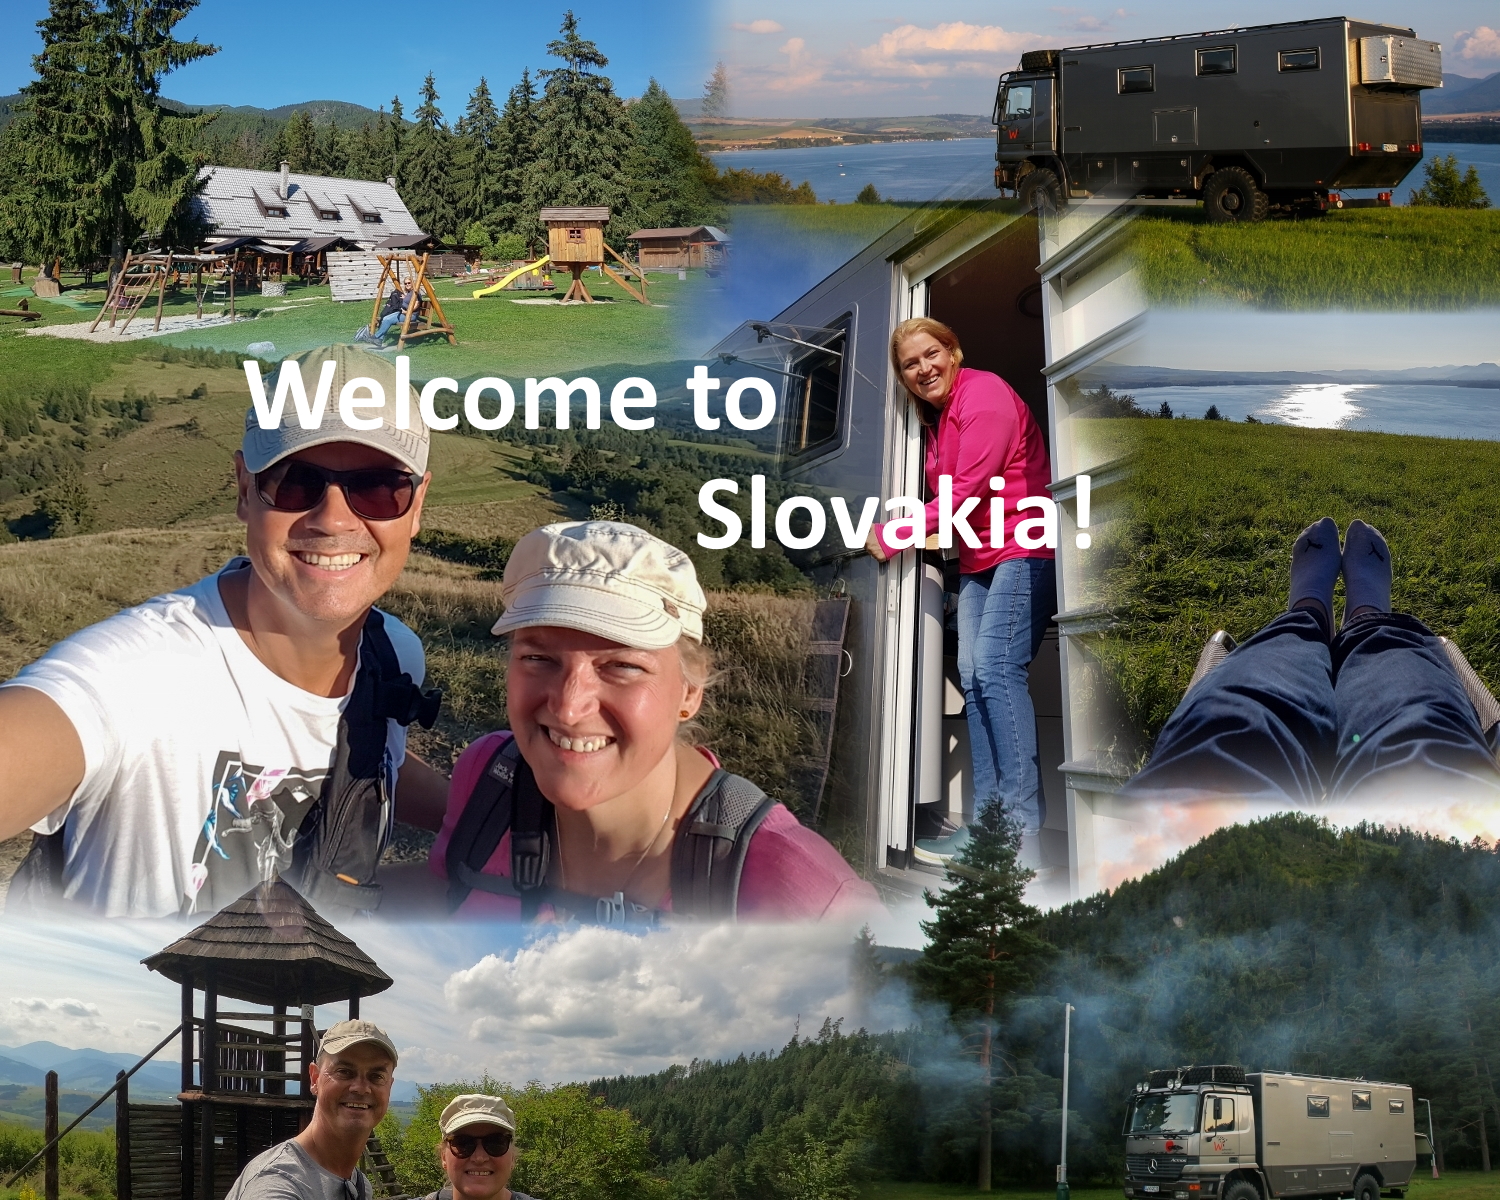 <span  class="uc_style_uc_tiles_grid_image_elementor_uc_items_attribute_title" style="color:#ffffff;">Welcome to Slovakia!</span>